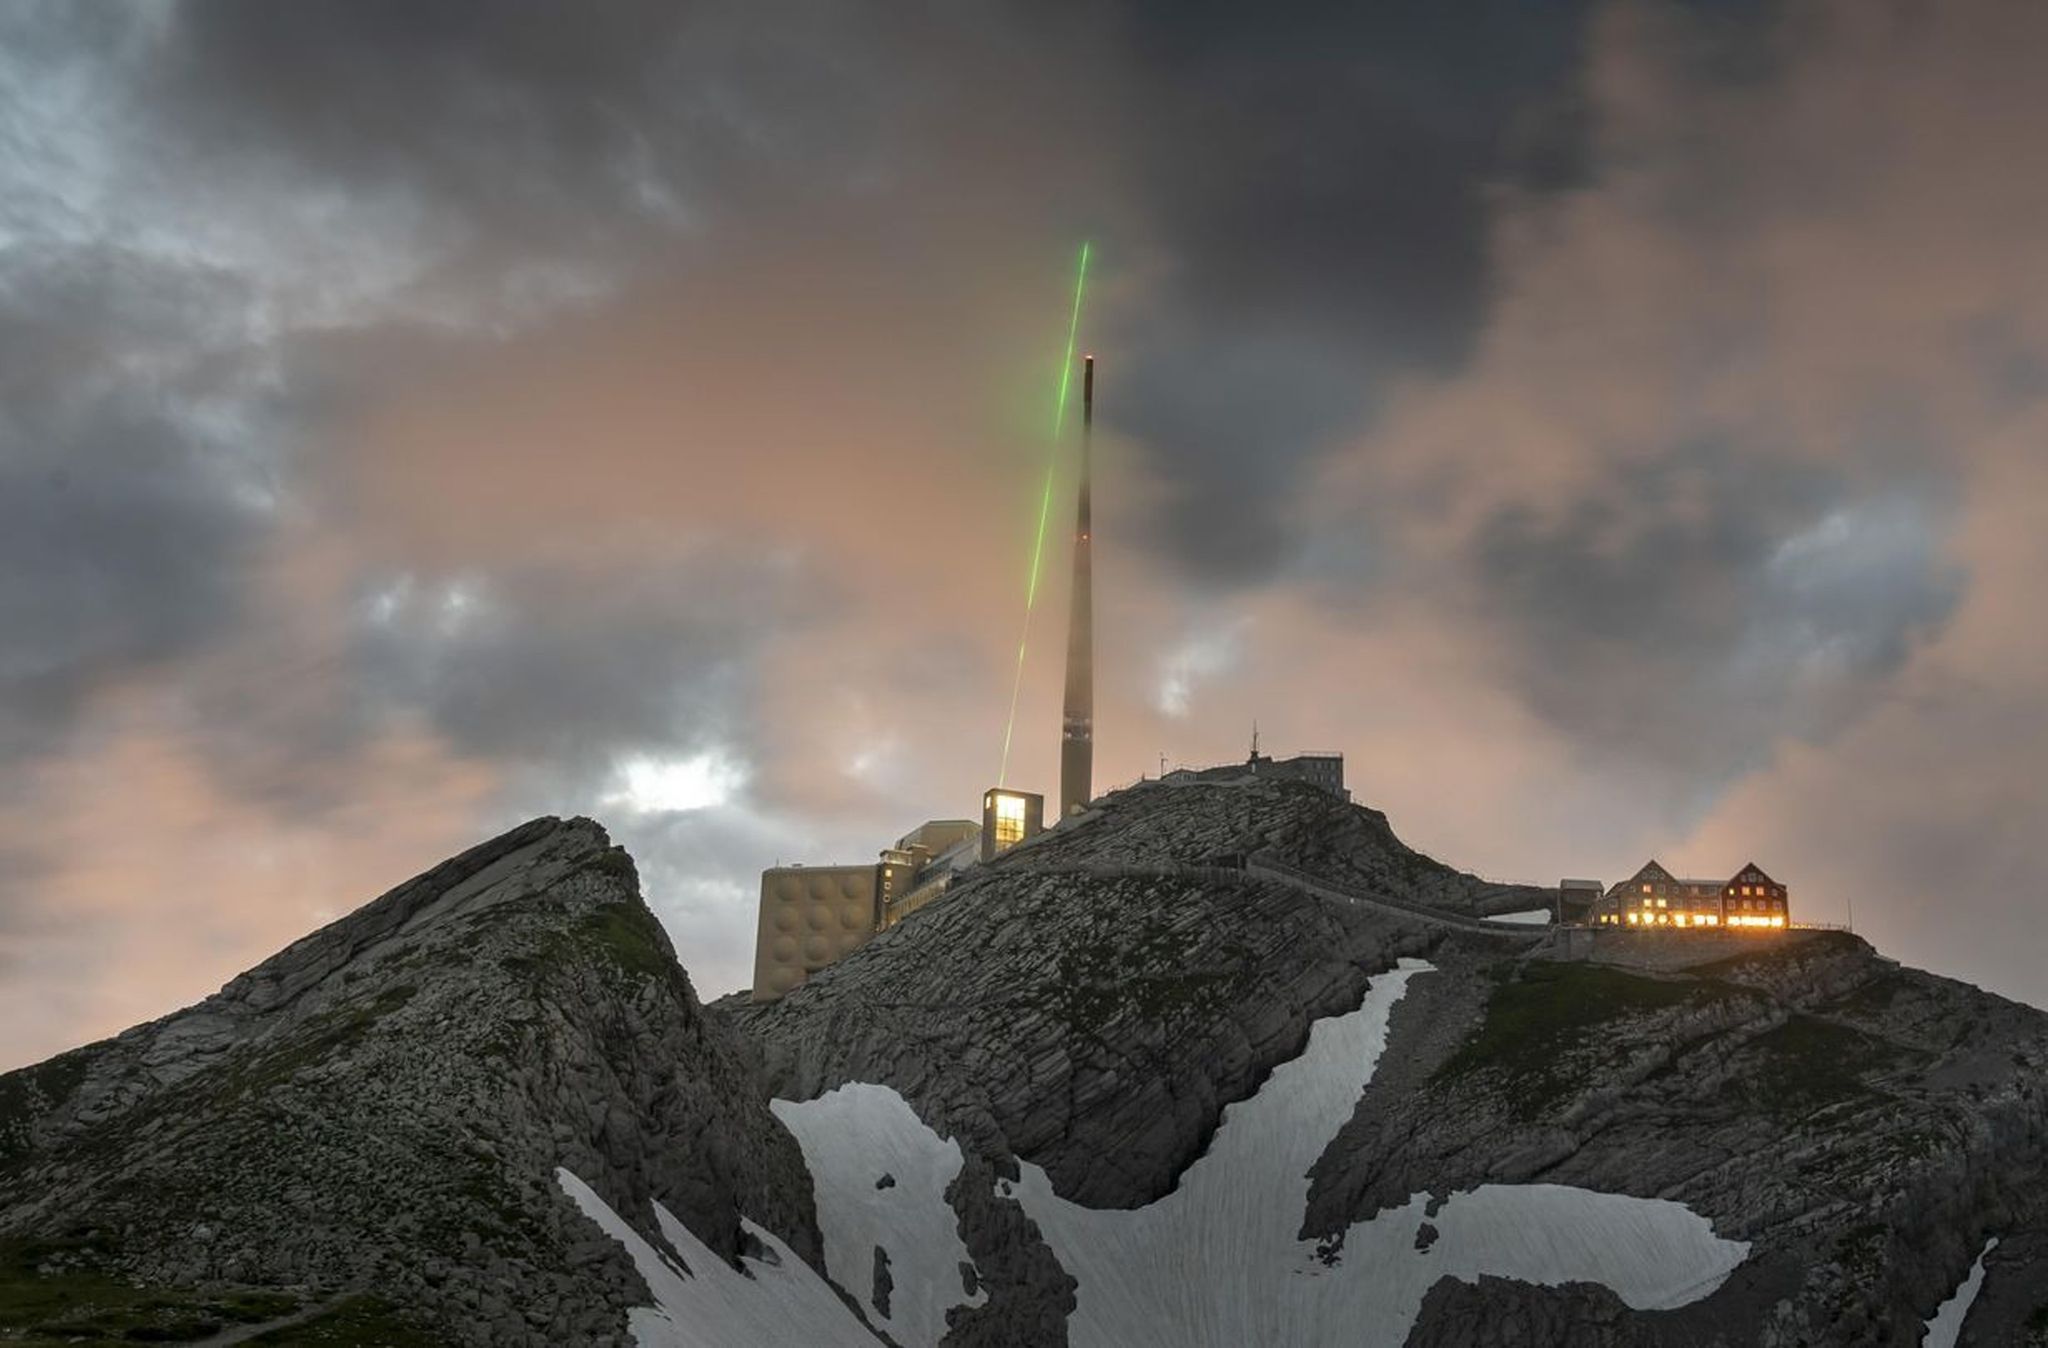 a laser on a mountain meant to block lightning